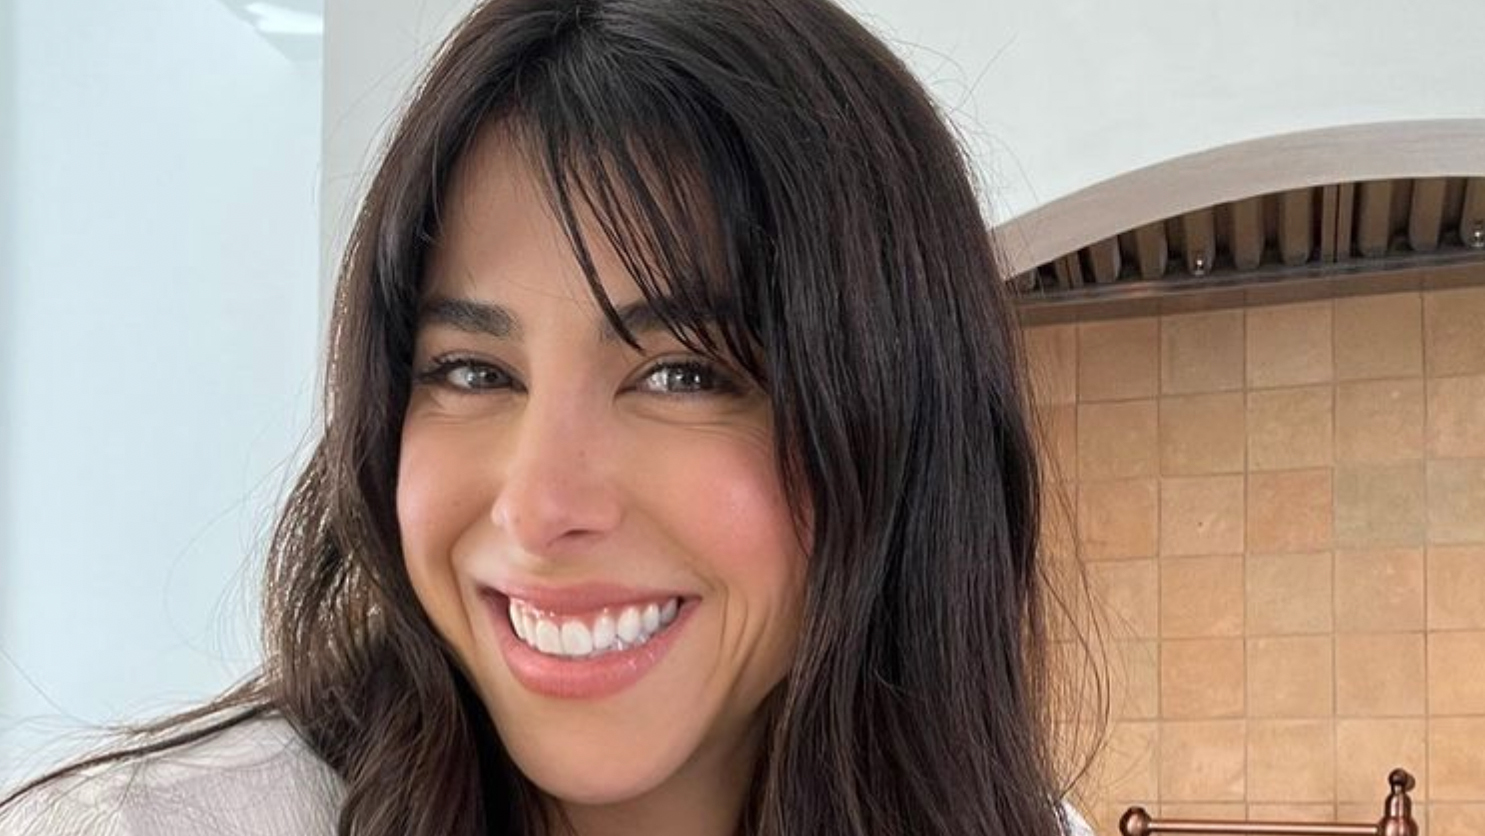 Former Nickelodeon Star Daniella Monet Opens Up About 'Sexualized' Scene  She Didn't Want On The Air